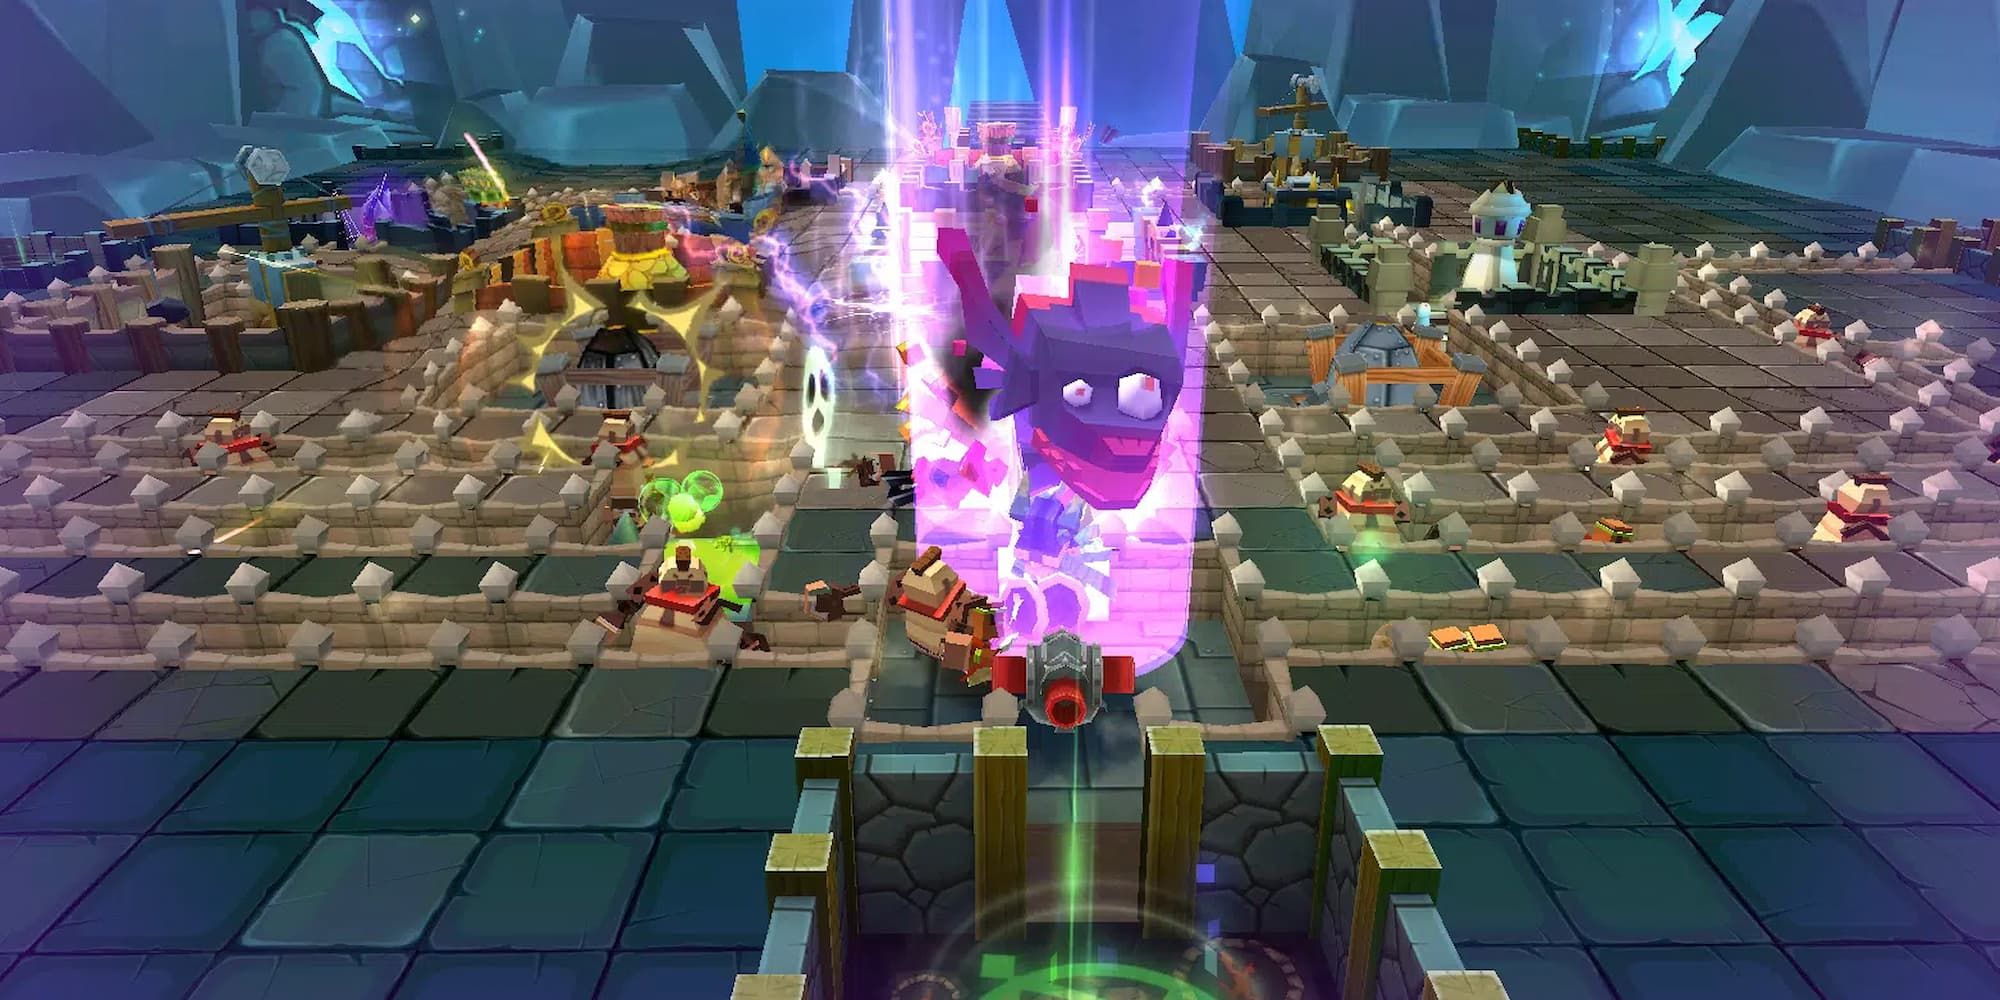 A creature gets blasted with a beam in a dungeon filled with traps in Billion Lords.